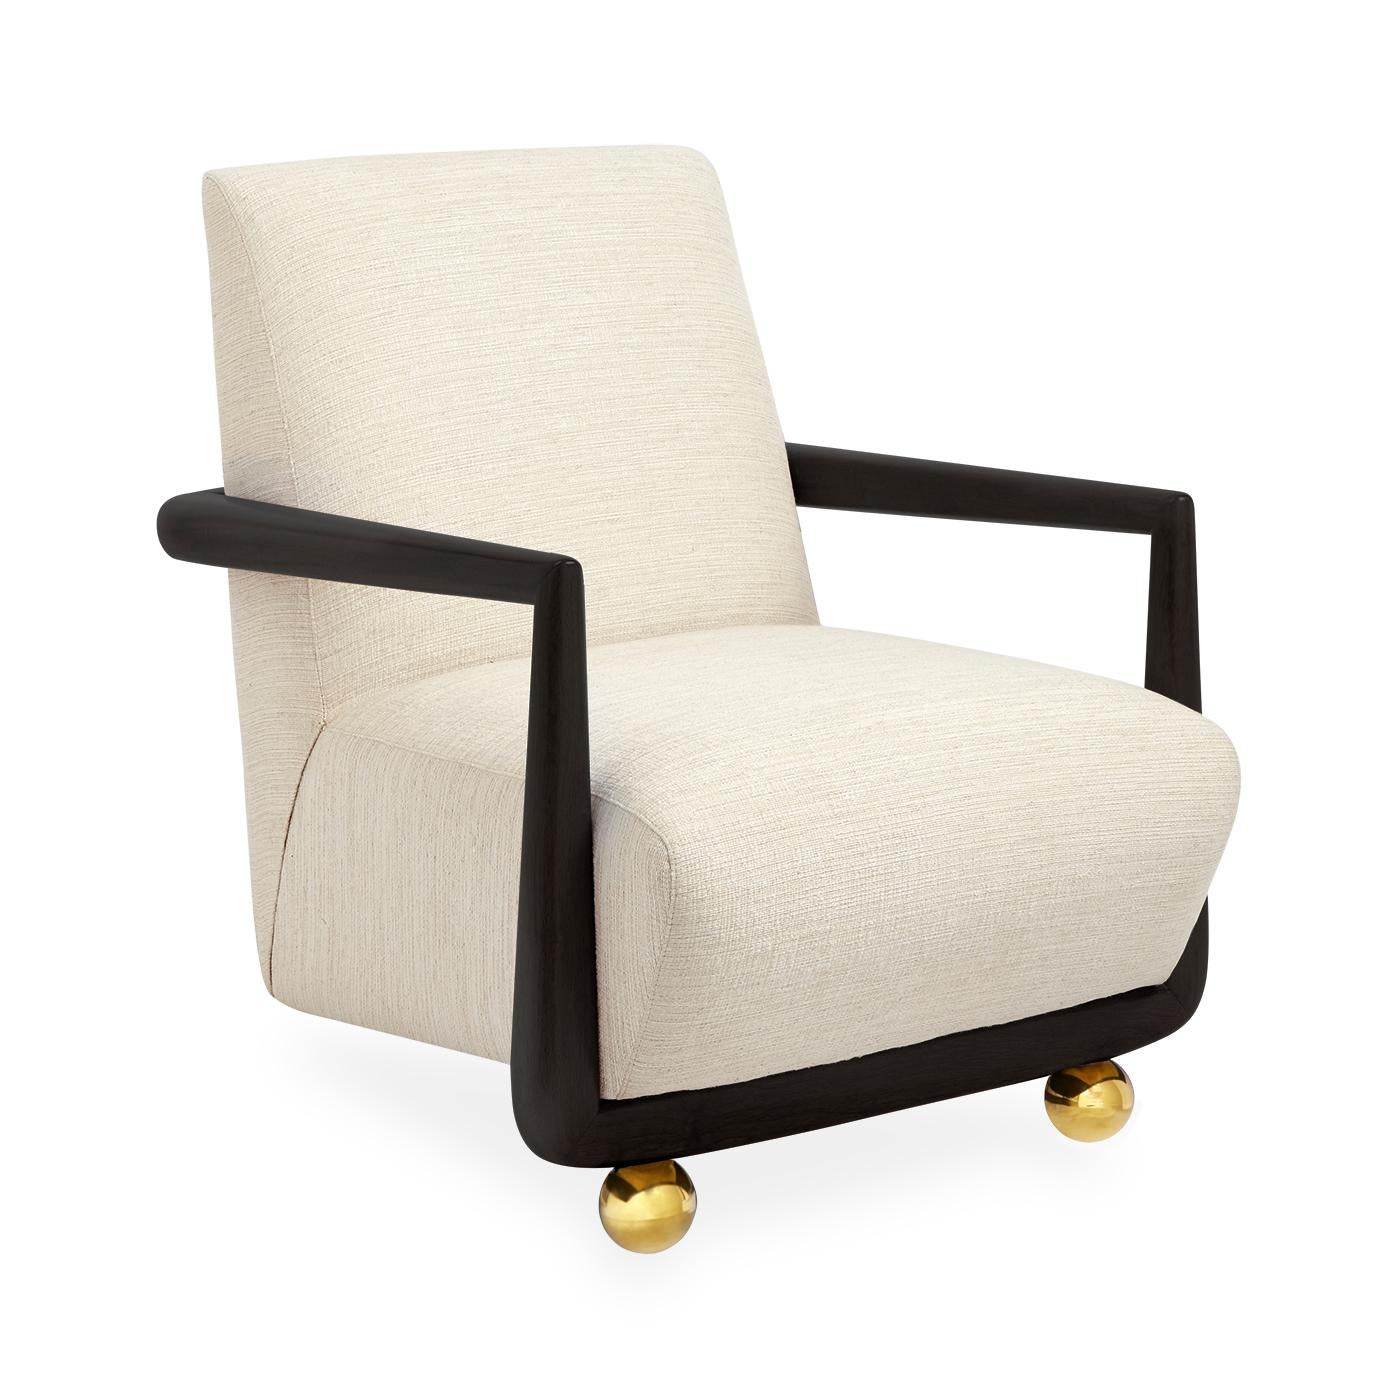 Warm modernism. Beautiful from every angle, the St. Germain club chair features a dash of Japanese rigor, a hint of Scandinavian Modernism, and a full dose of chic. A sinuous and simple wood frame, sanded and oiled to reveal its natural beauty,